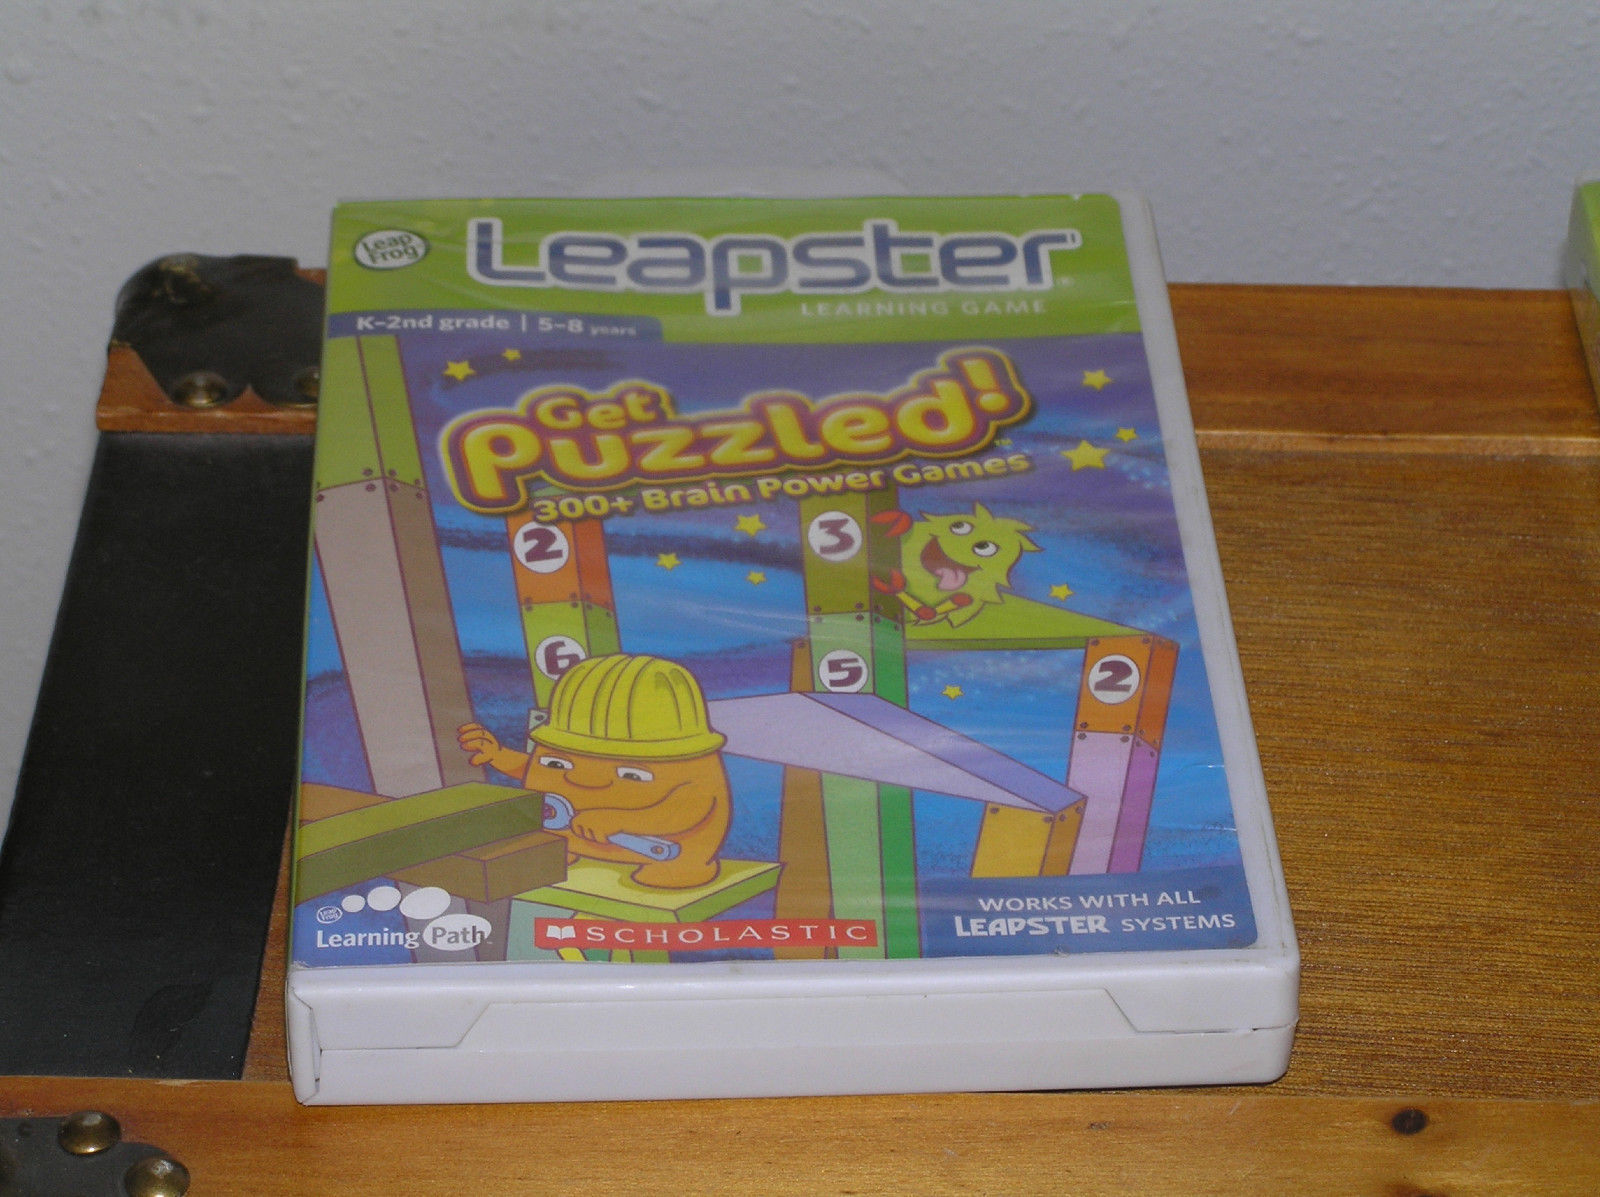 Leapster 2 LeapFrog Scholastic Animal Genius Game Cartridge Leap Frog Ages 5-8 for sale online 